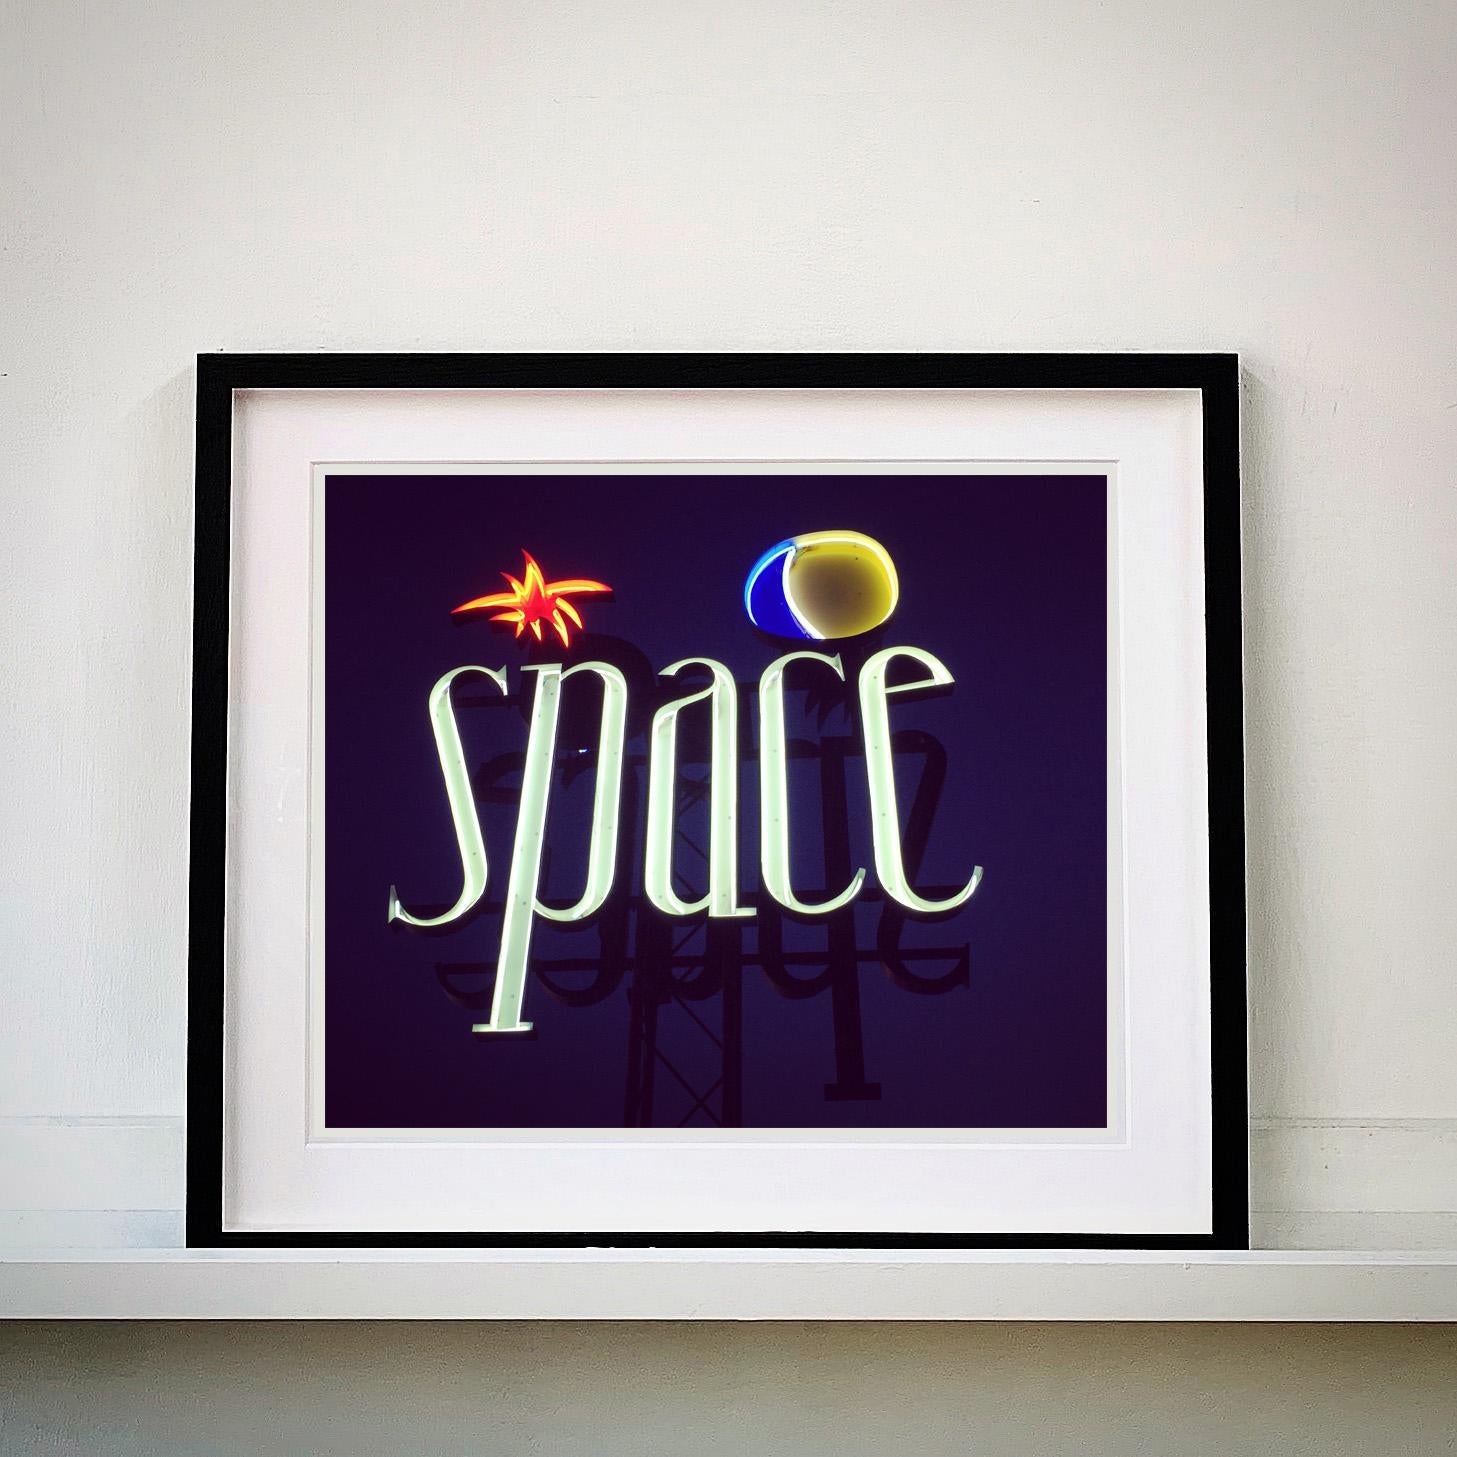 Space, Ibiza, the Balearic Islands Framed - Contemporary Color Sign Photography - Print by Richard Heeps